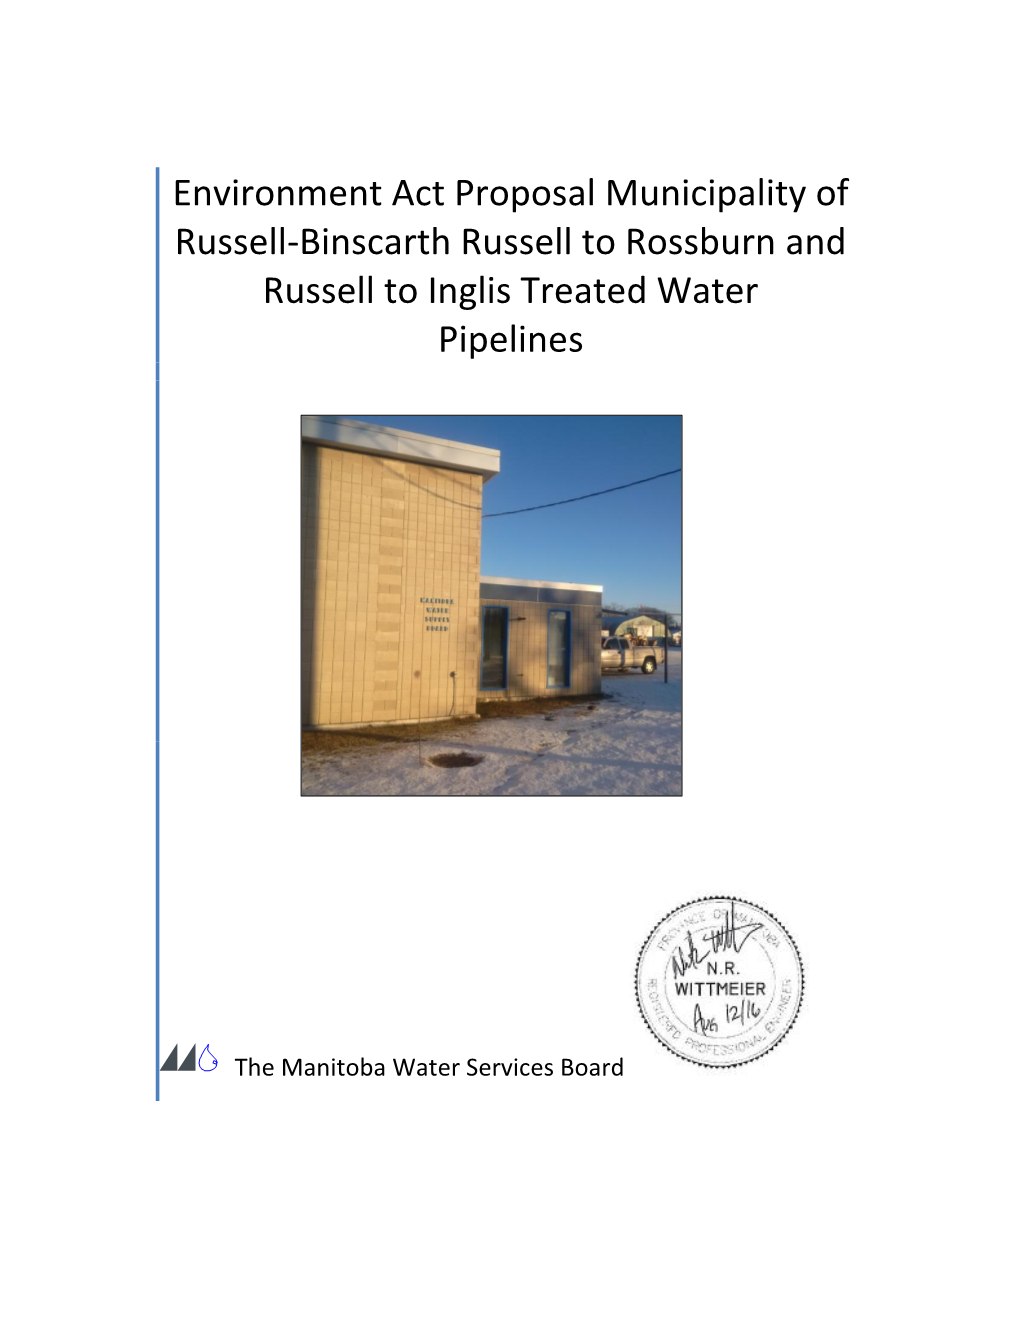 Environment Act Proposal Municipality of Russell-Binscarth Russell to Rossburn and Russell to Inglis Treated Water Pipelines